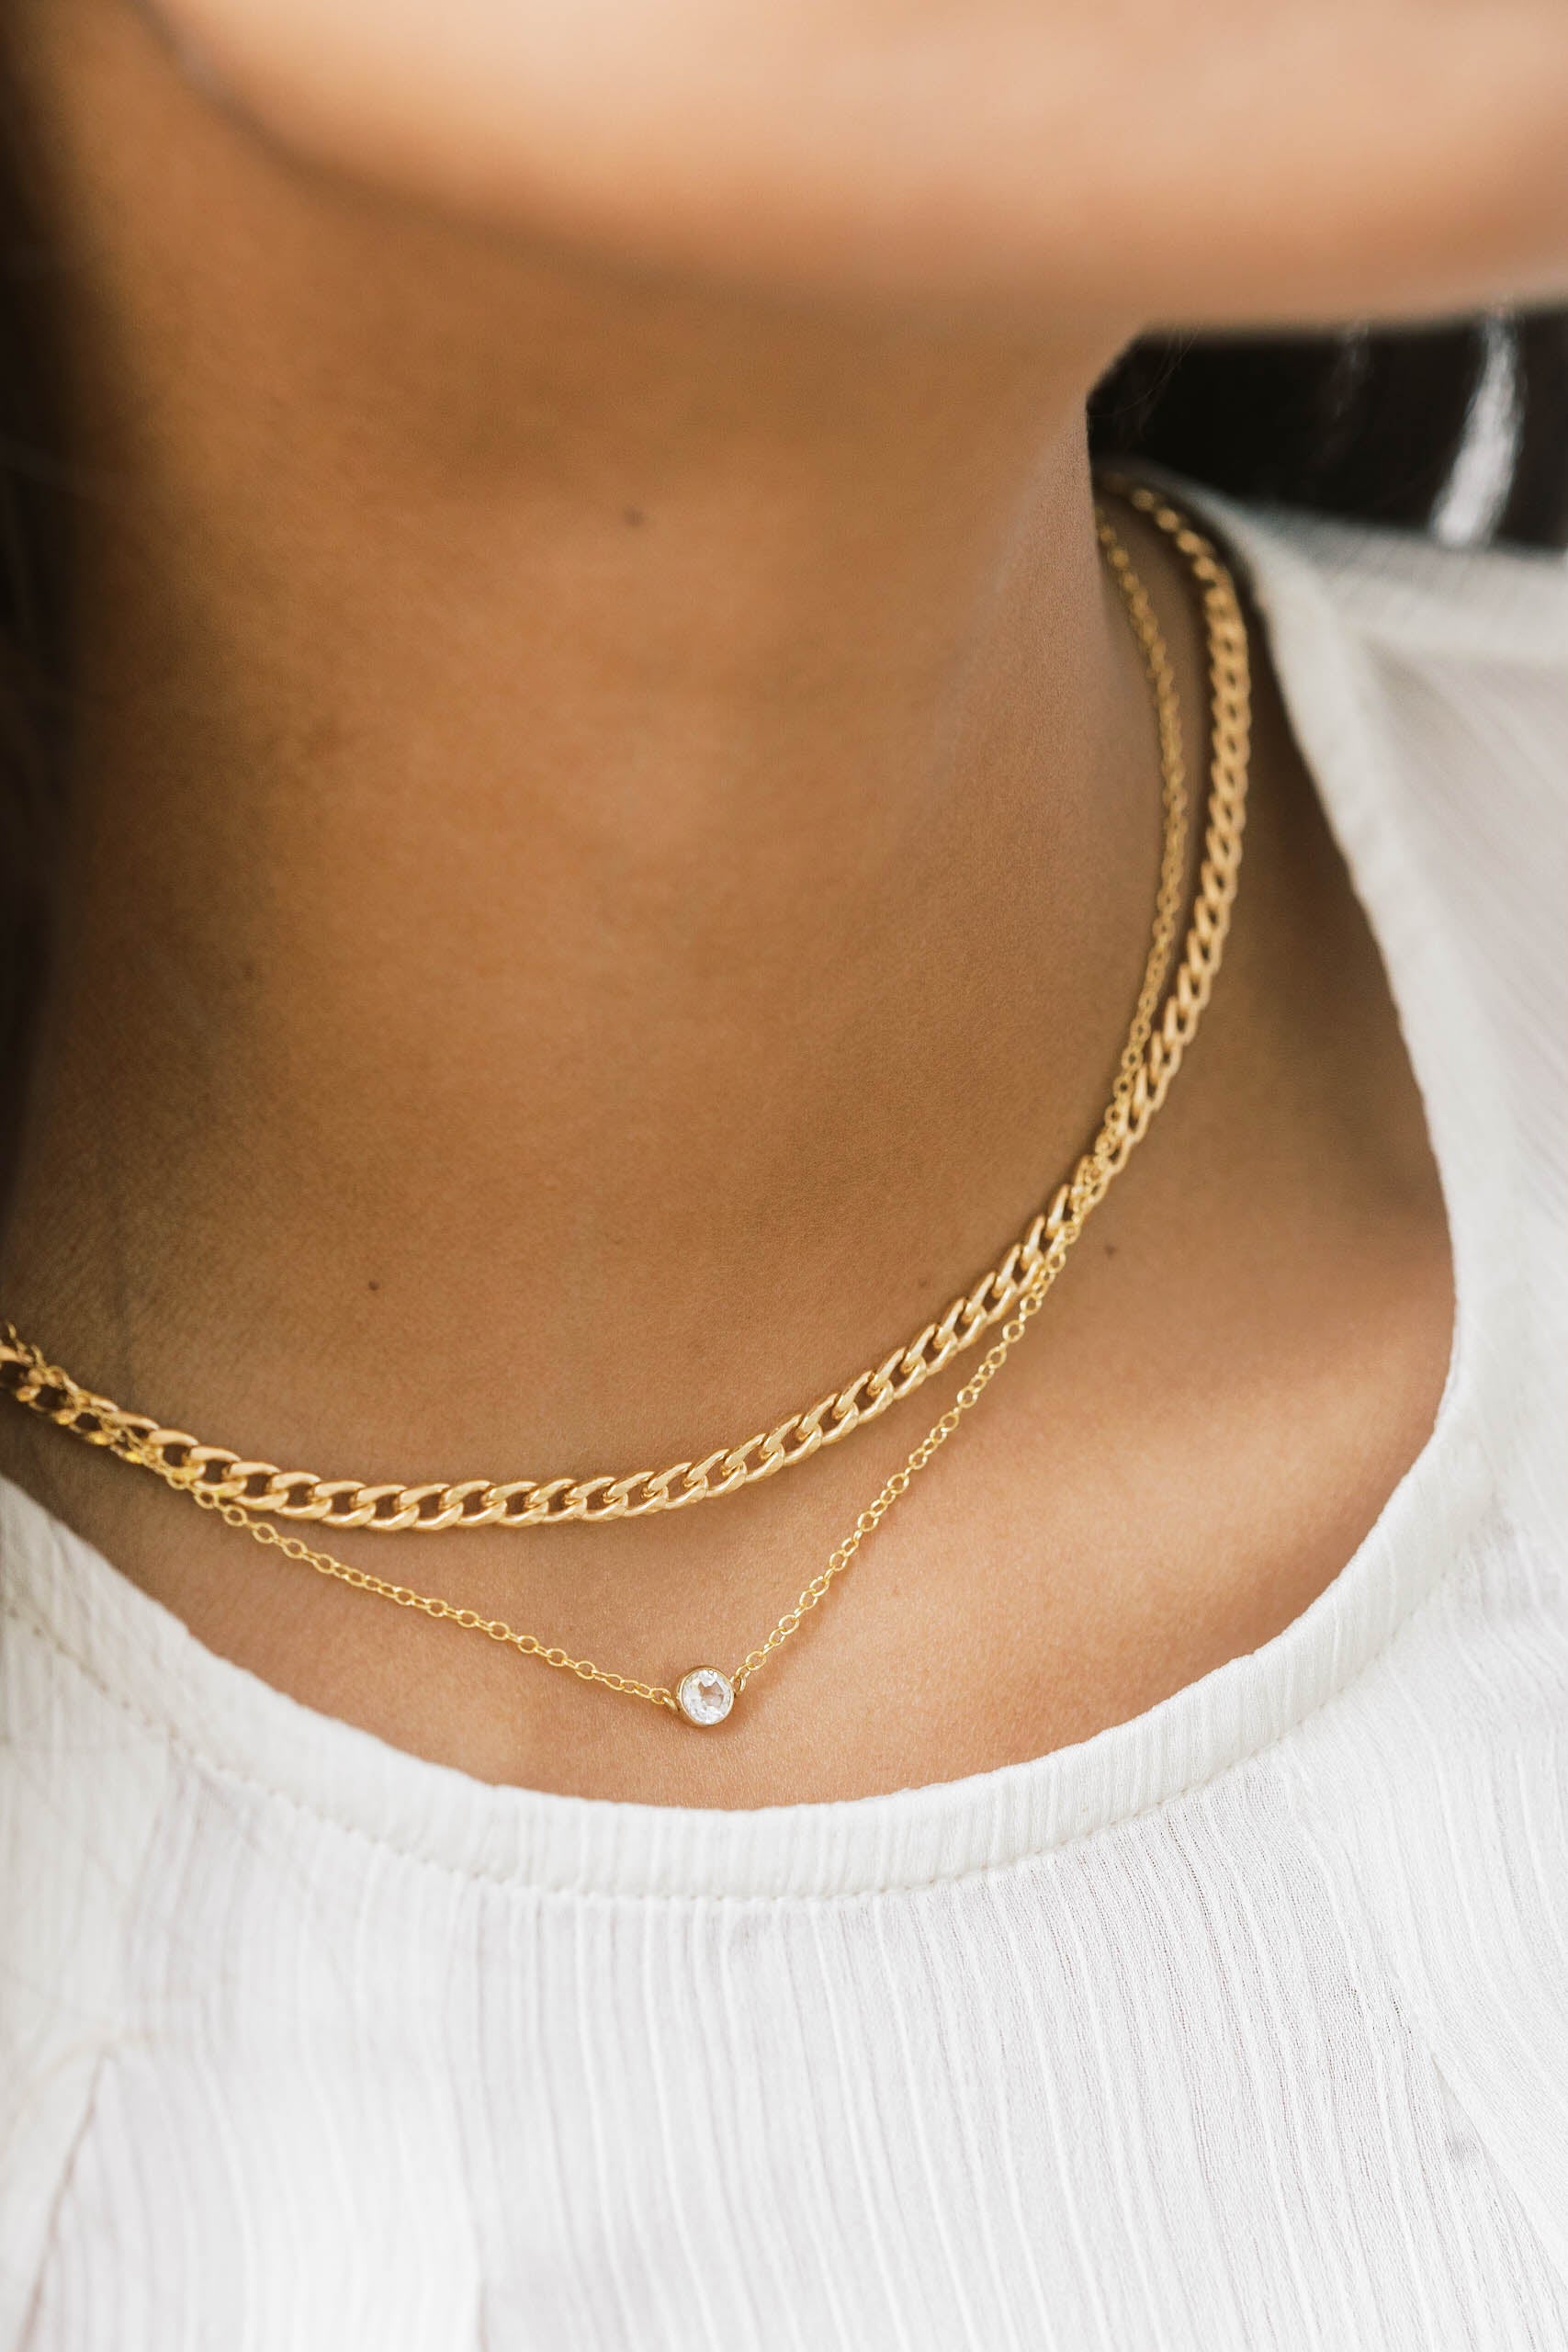 The gold curb chain is a classic chain necklace to wear alone or layer 